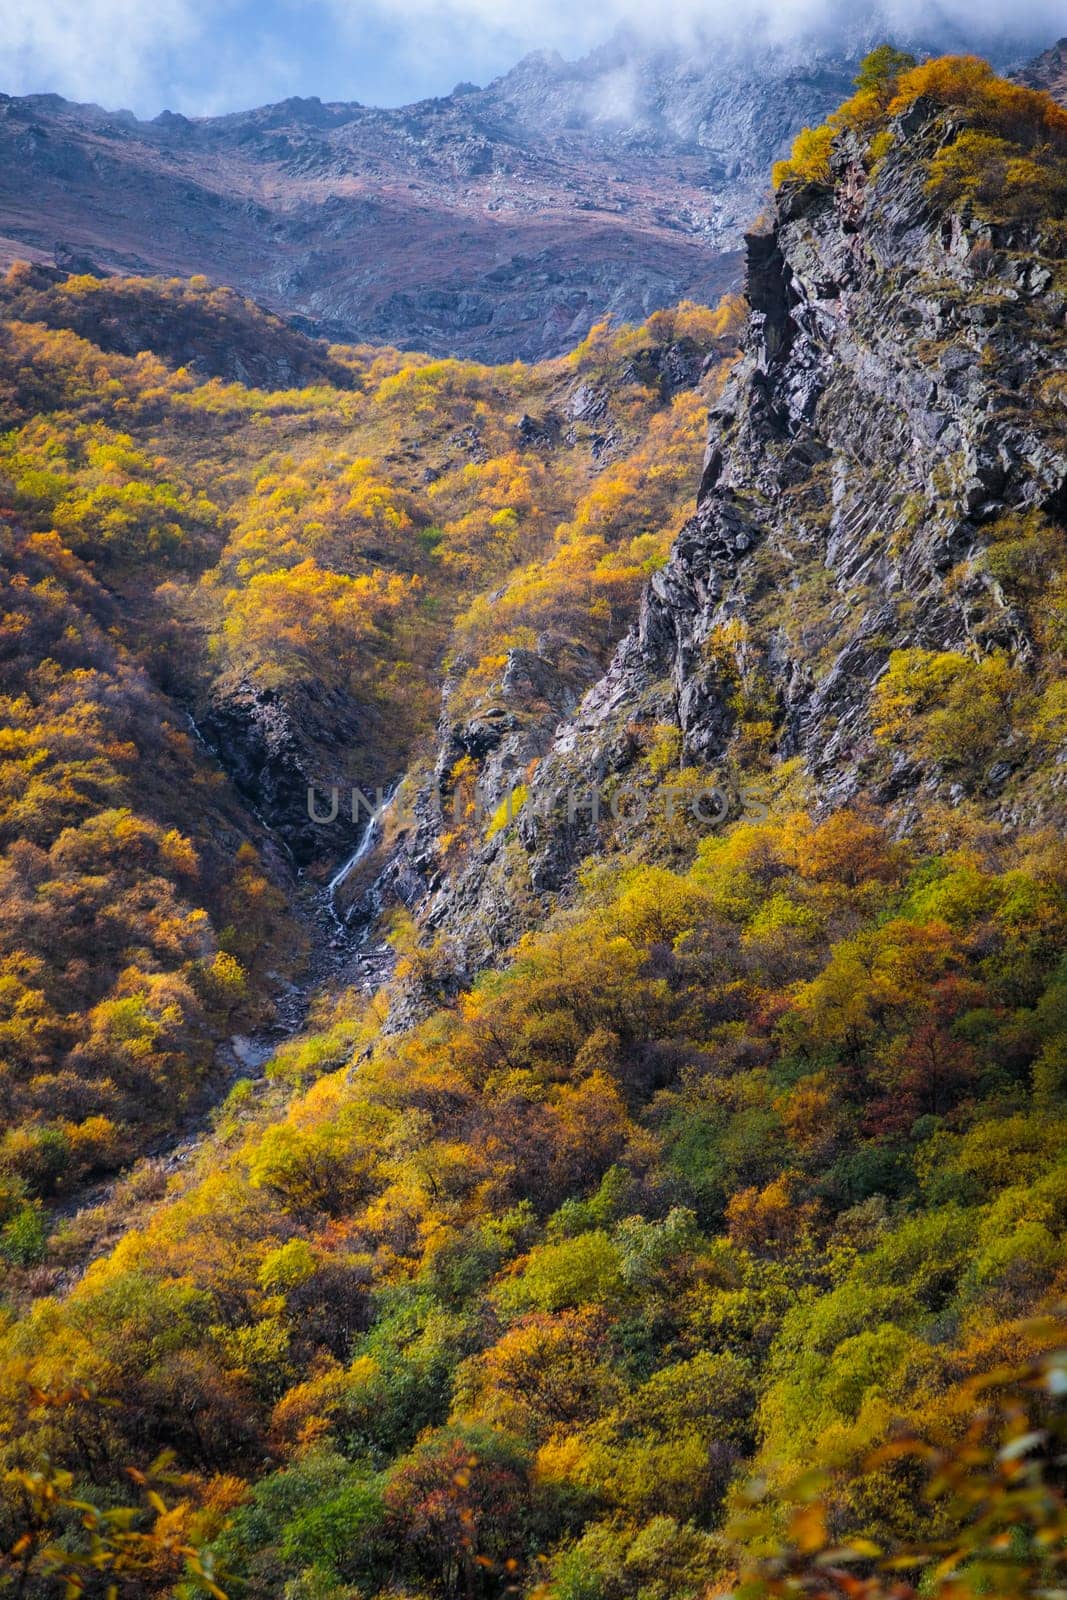 Autumn colors in the mountains by Yurich32